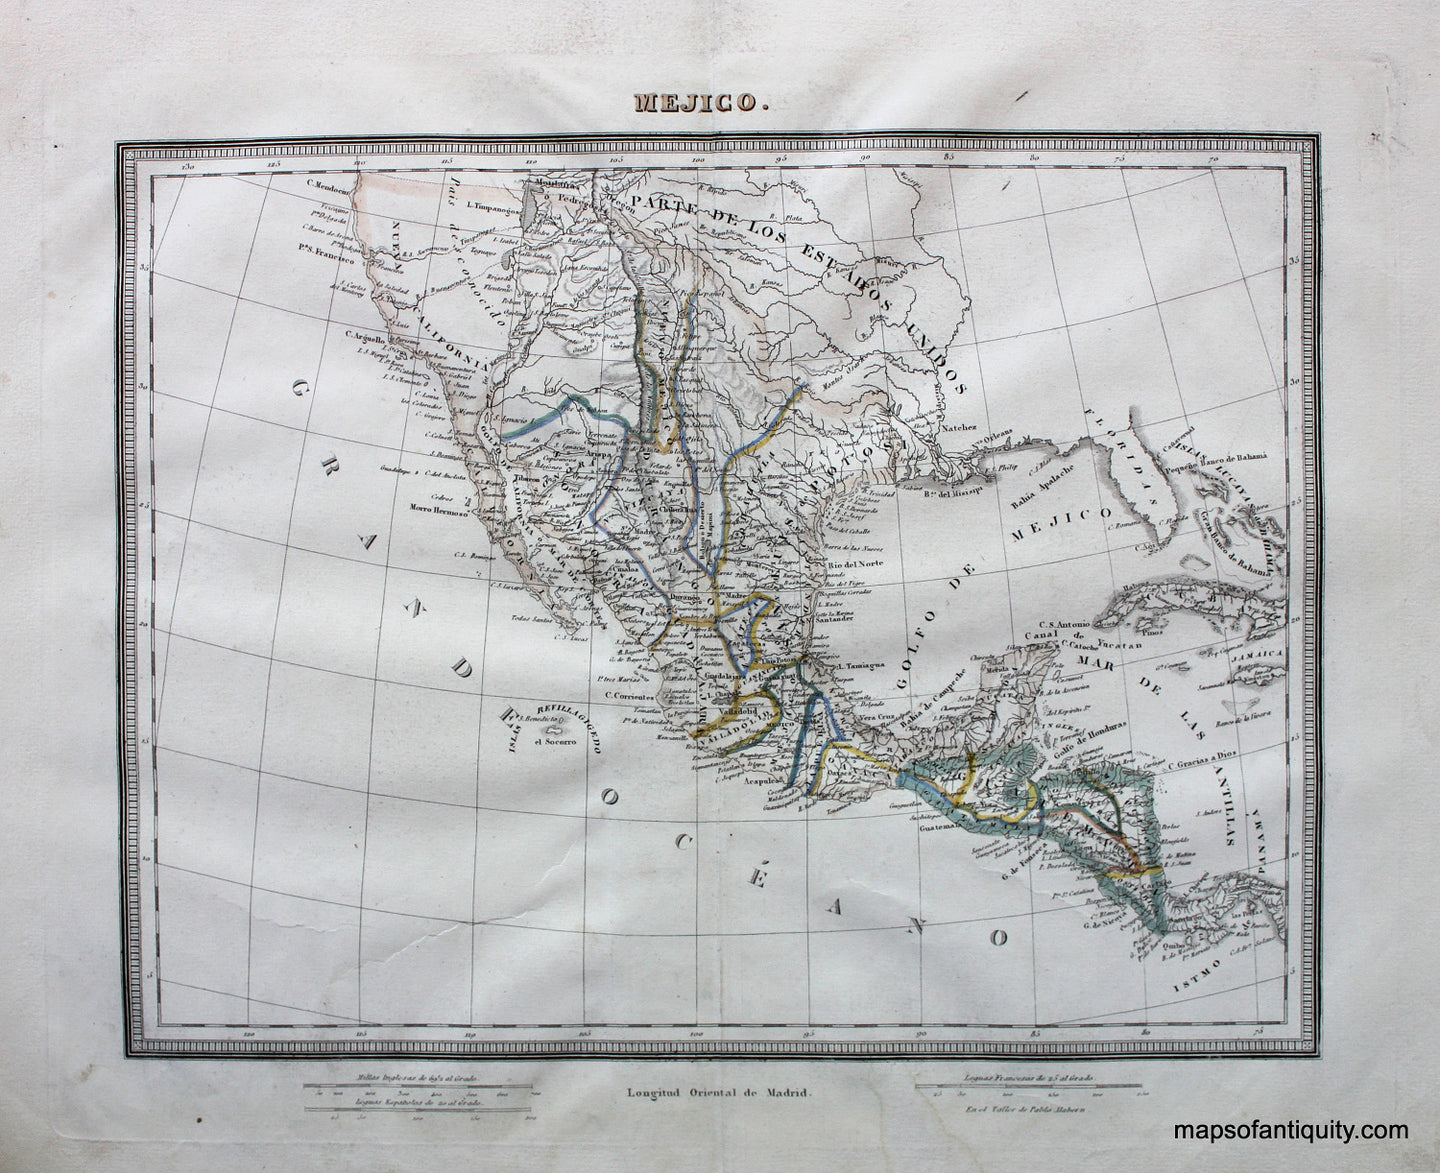 Antique-Hand-Colored-Map-Mexico-Central-America-Mexico-c.-1820--Pablo-Alabern-Maps-Of-Antiquity